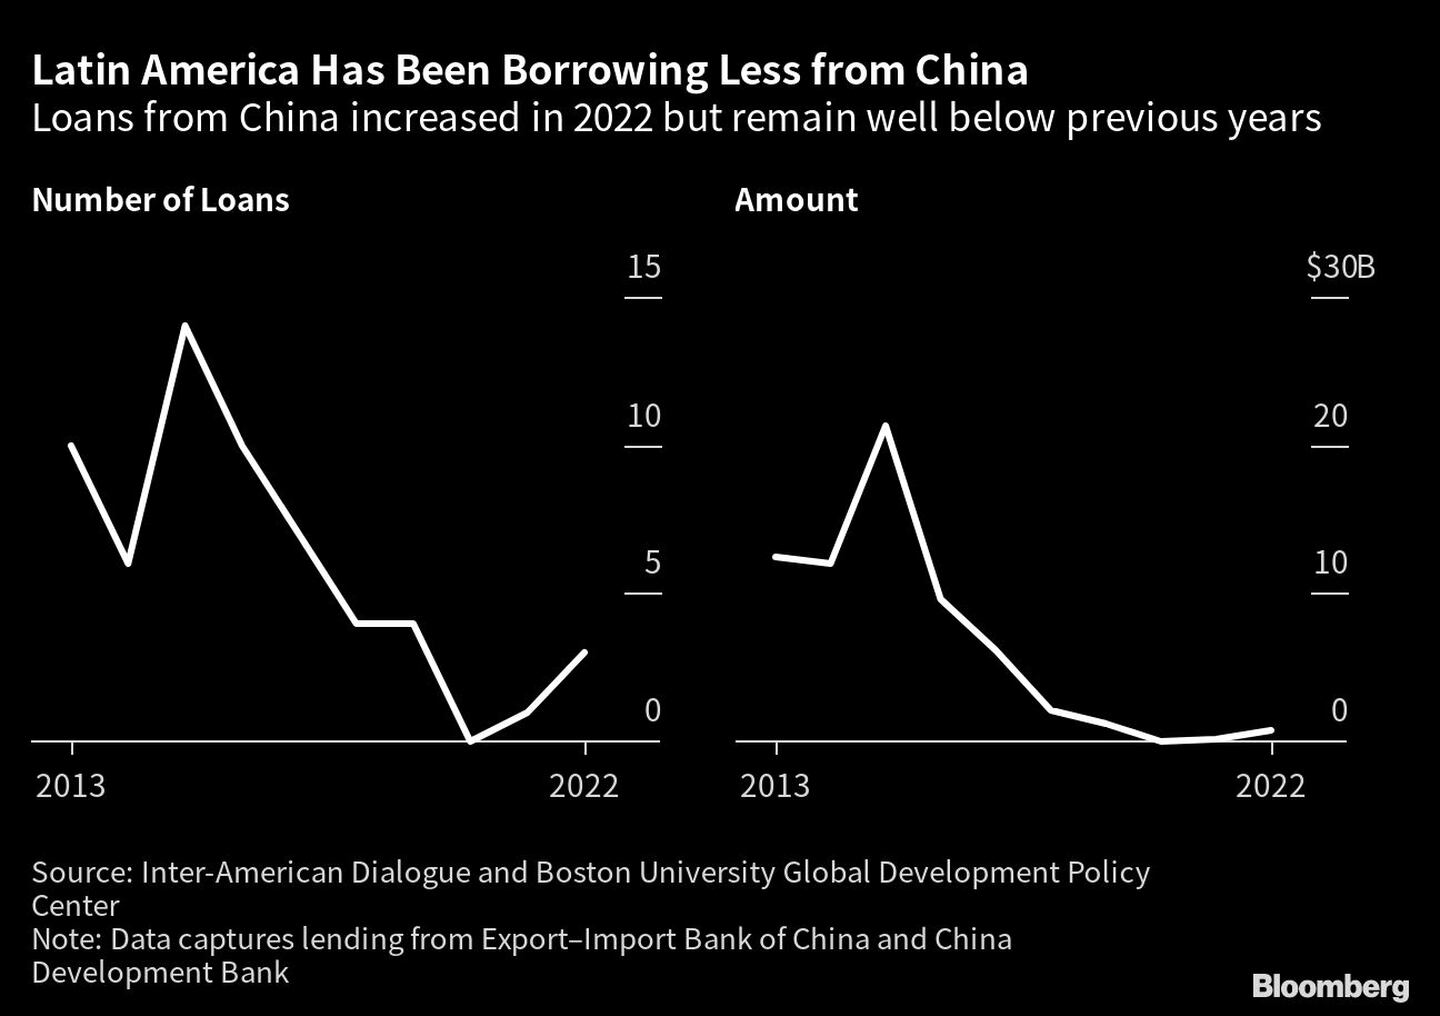 Latin America Has Been Borrowing Less from China | Loans from China increased in 2022 but remain well below previous yearsdfd